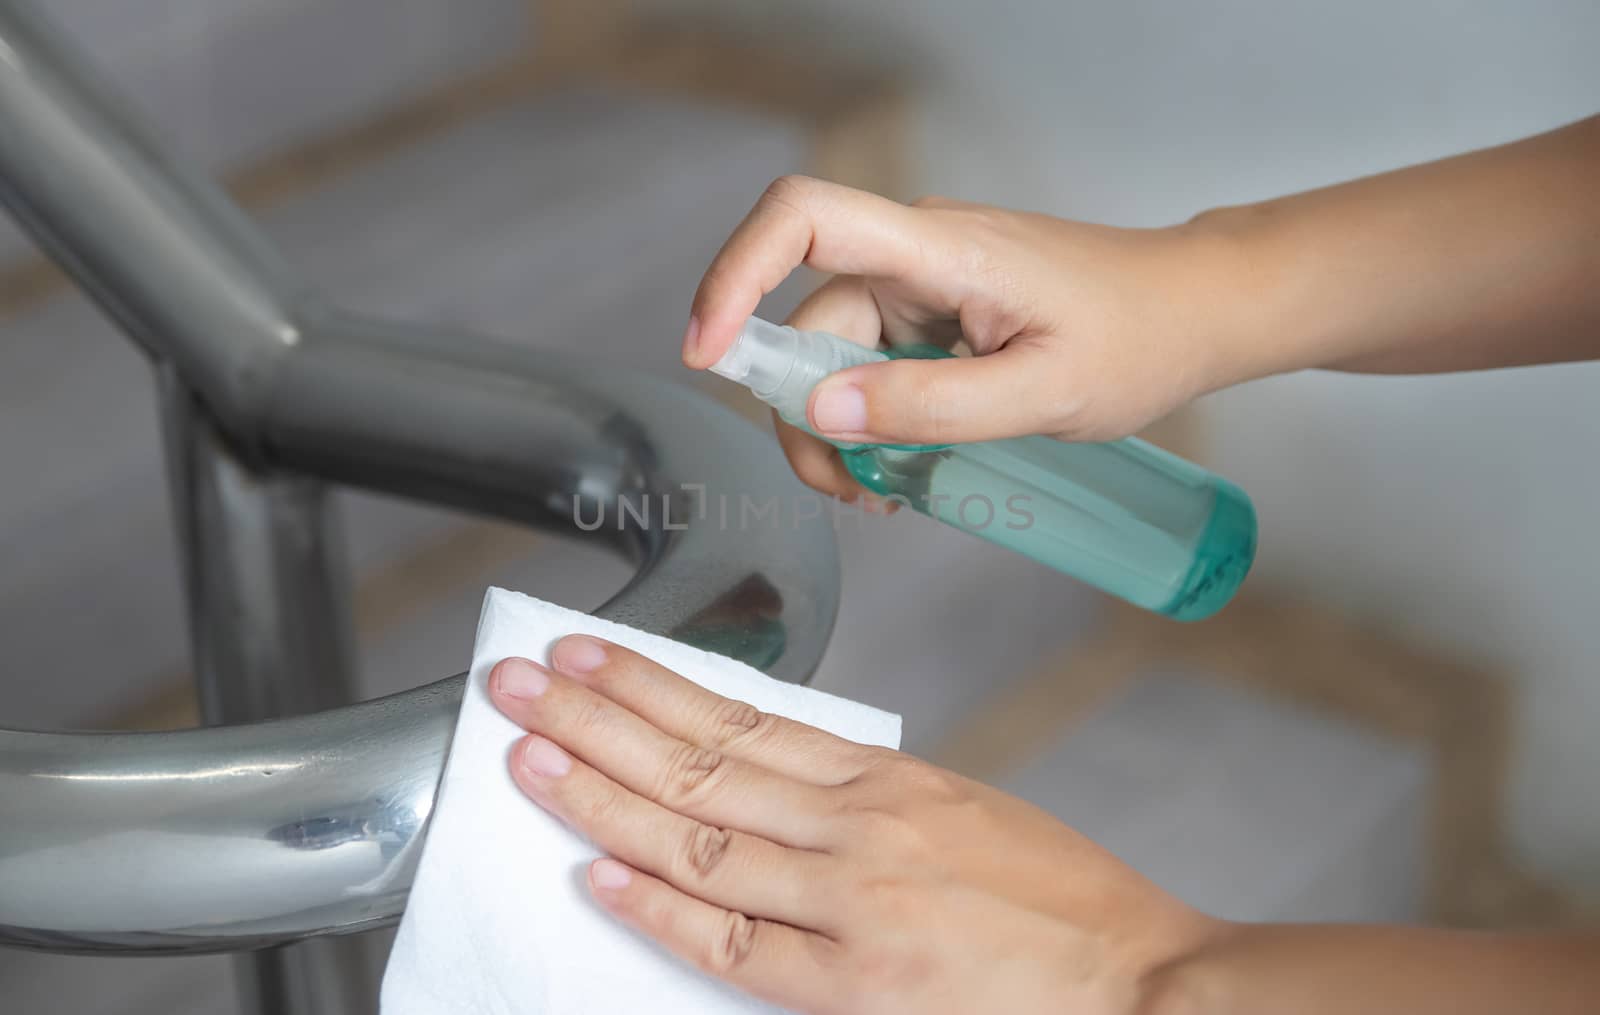 disinfect, sanitize, hygiene care. cleaning staff using alcohol spray on banister and frequently touched area for cleaning and disinfection, prevention of germs spreading during infections of COVID-19